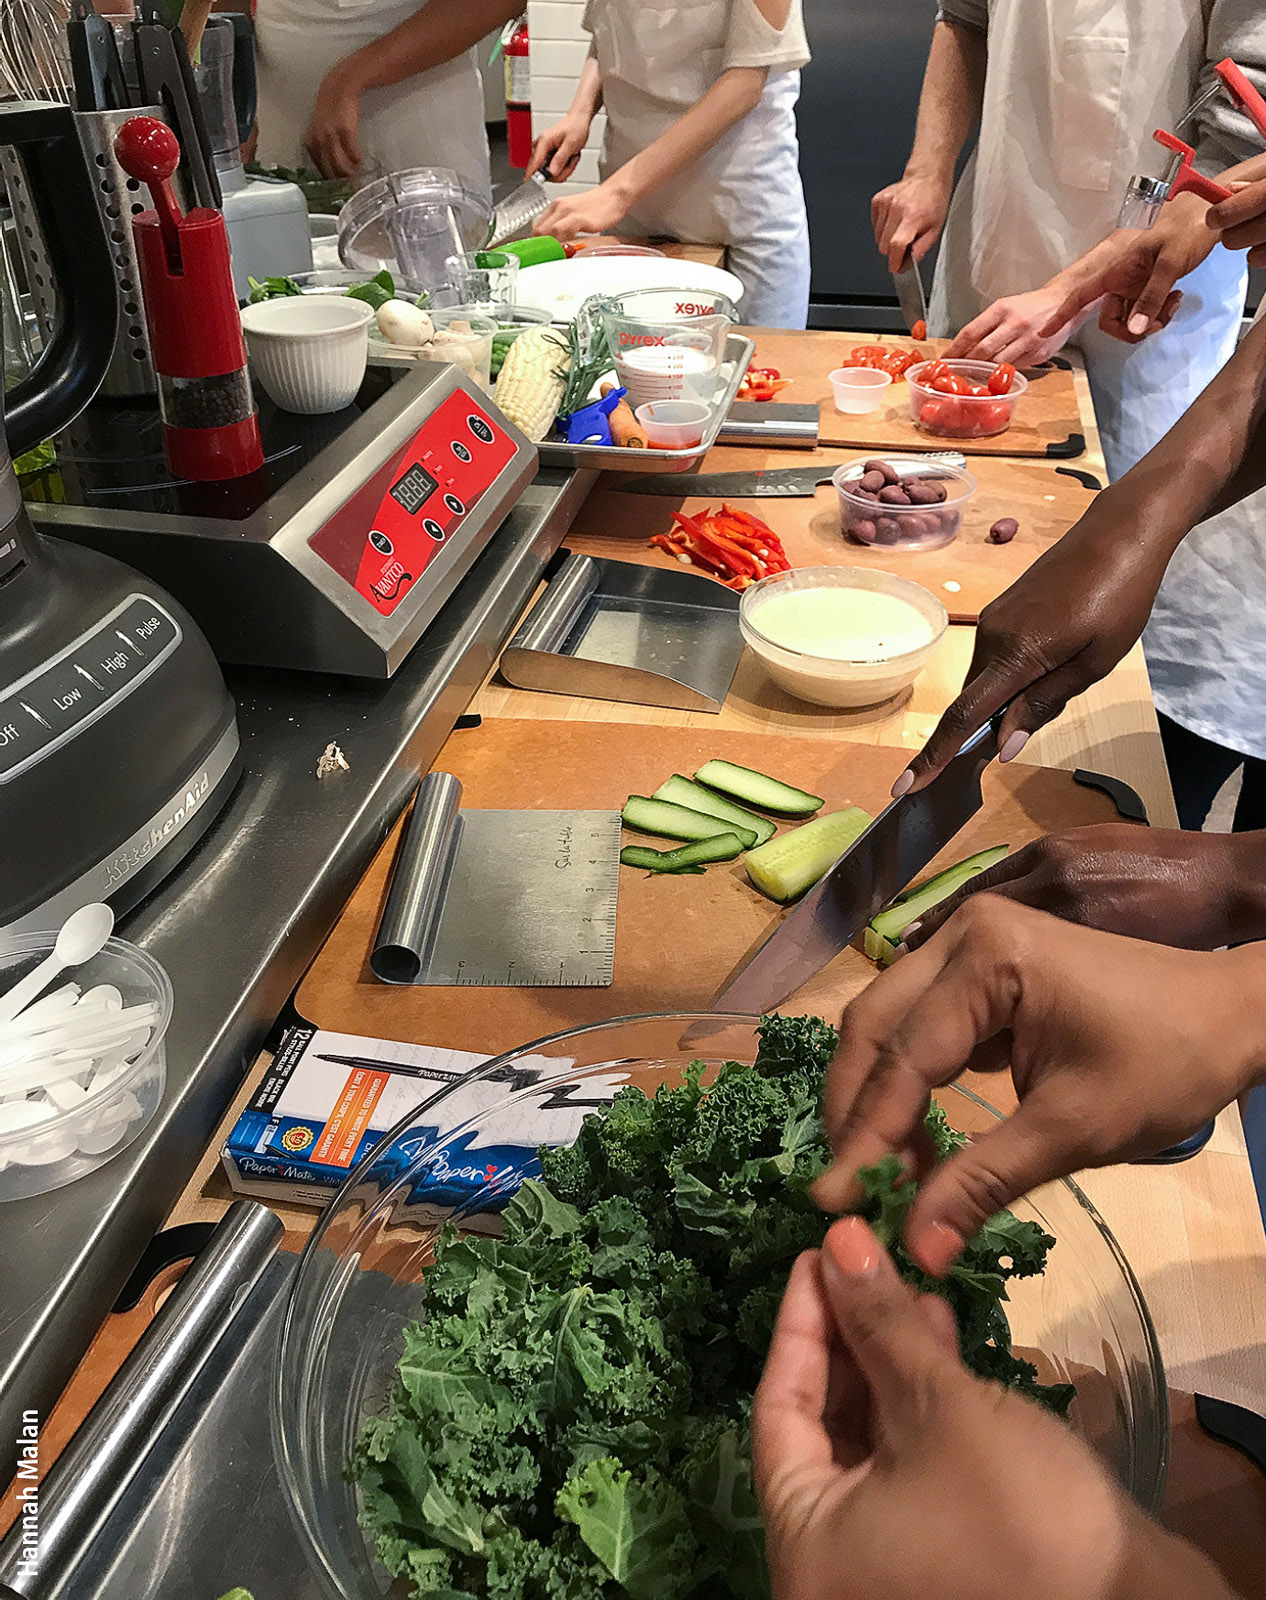 With support from the UCLA Healthy Campus Initiative and David Geffen School of Medicine, a teaching kitchen pilot program was launched in spring 2017 for students in health-related fields. Based on the high level of interest and positive feedback, organizers hope to expand the program.